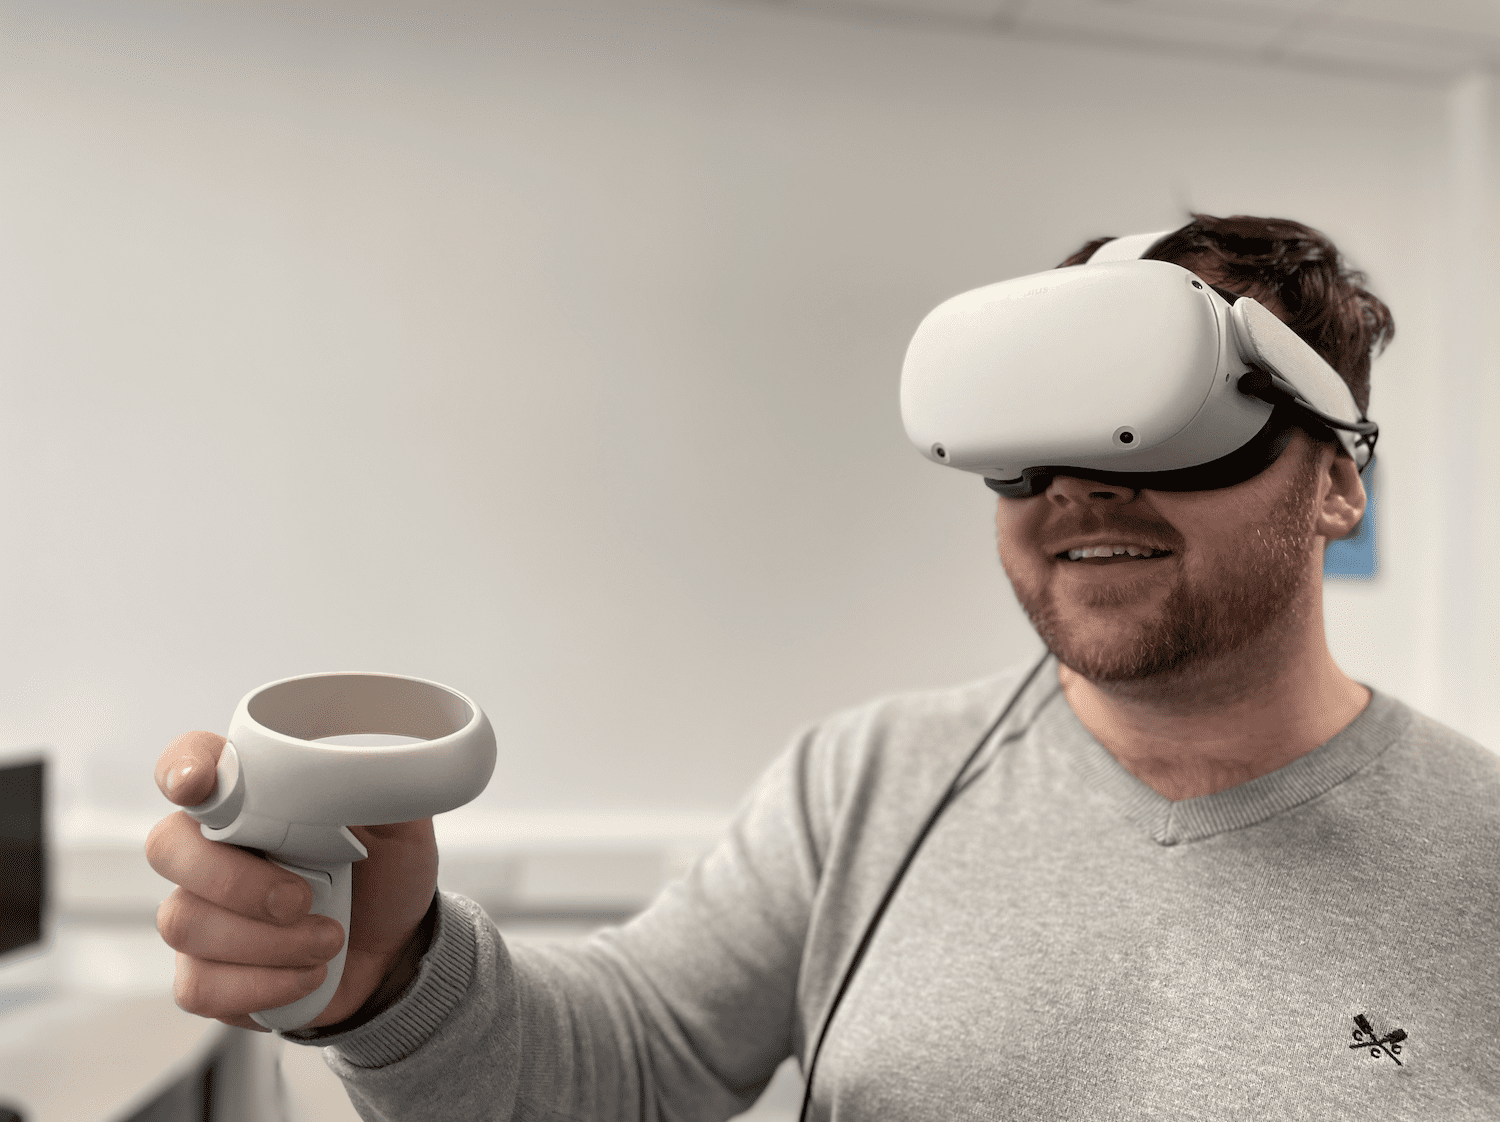 Man with a VR headset on